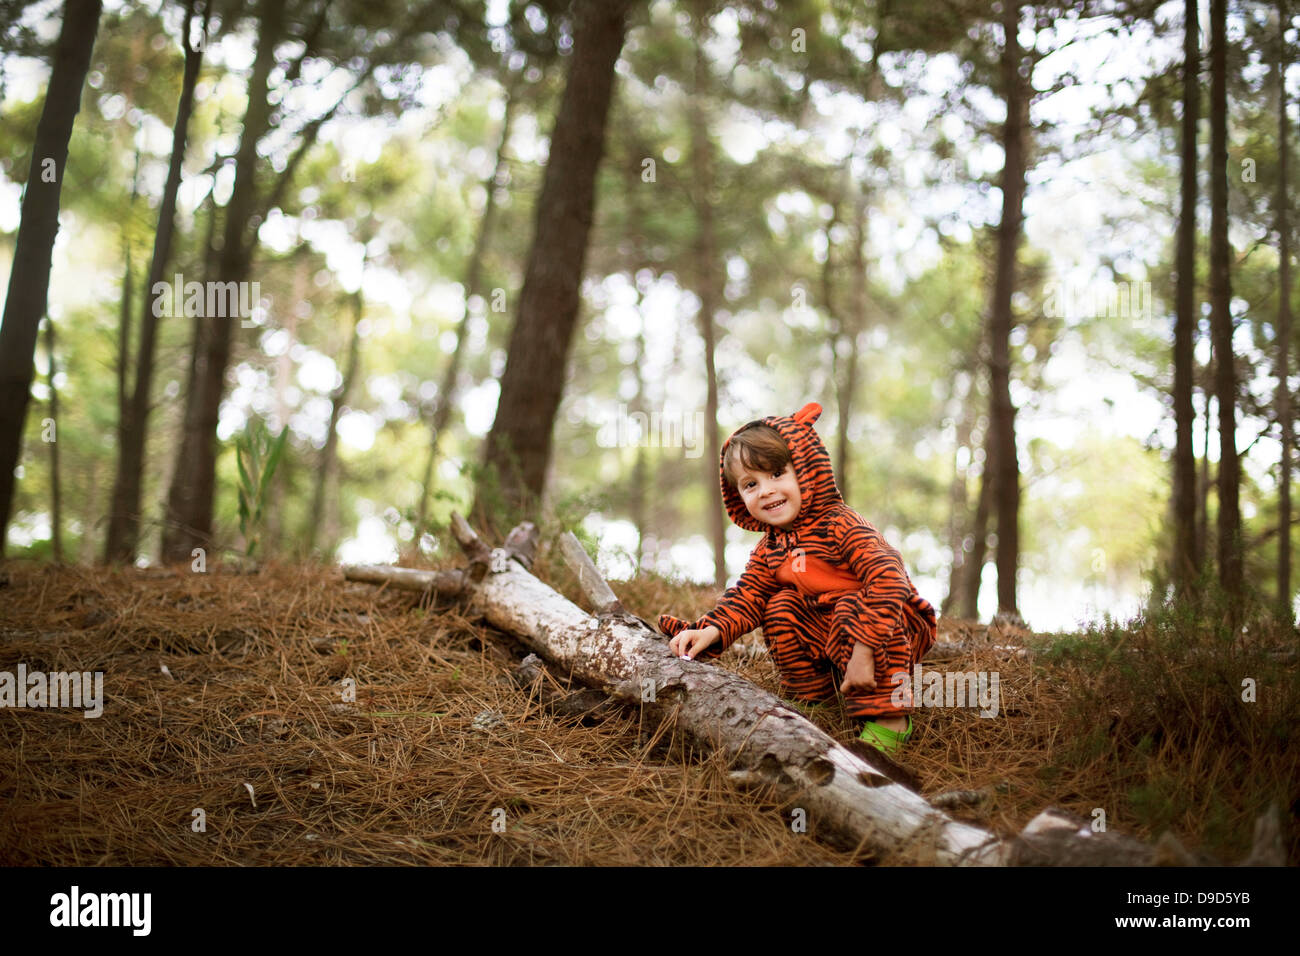 Portrait of male toddler wearing tiger suit playing in woods Stock Photo